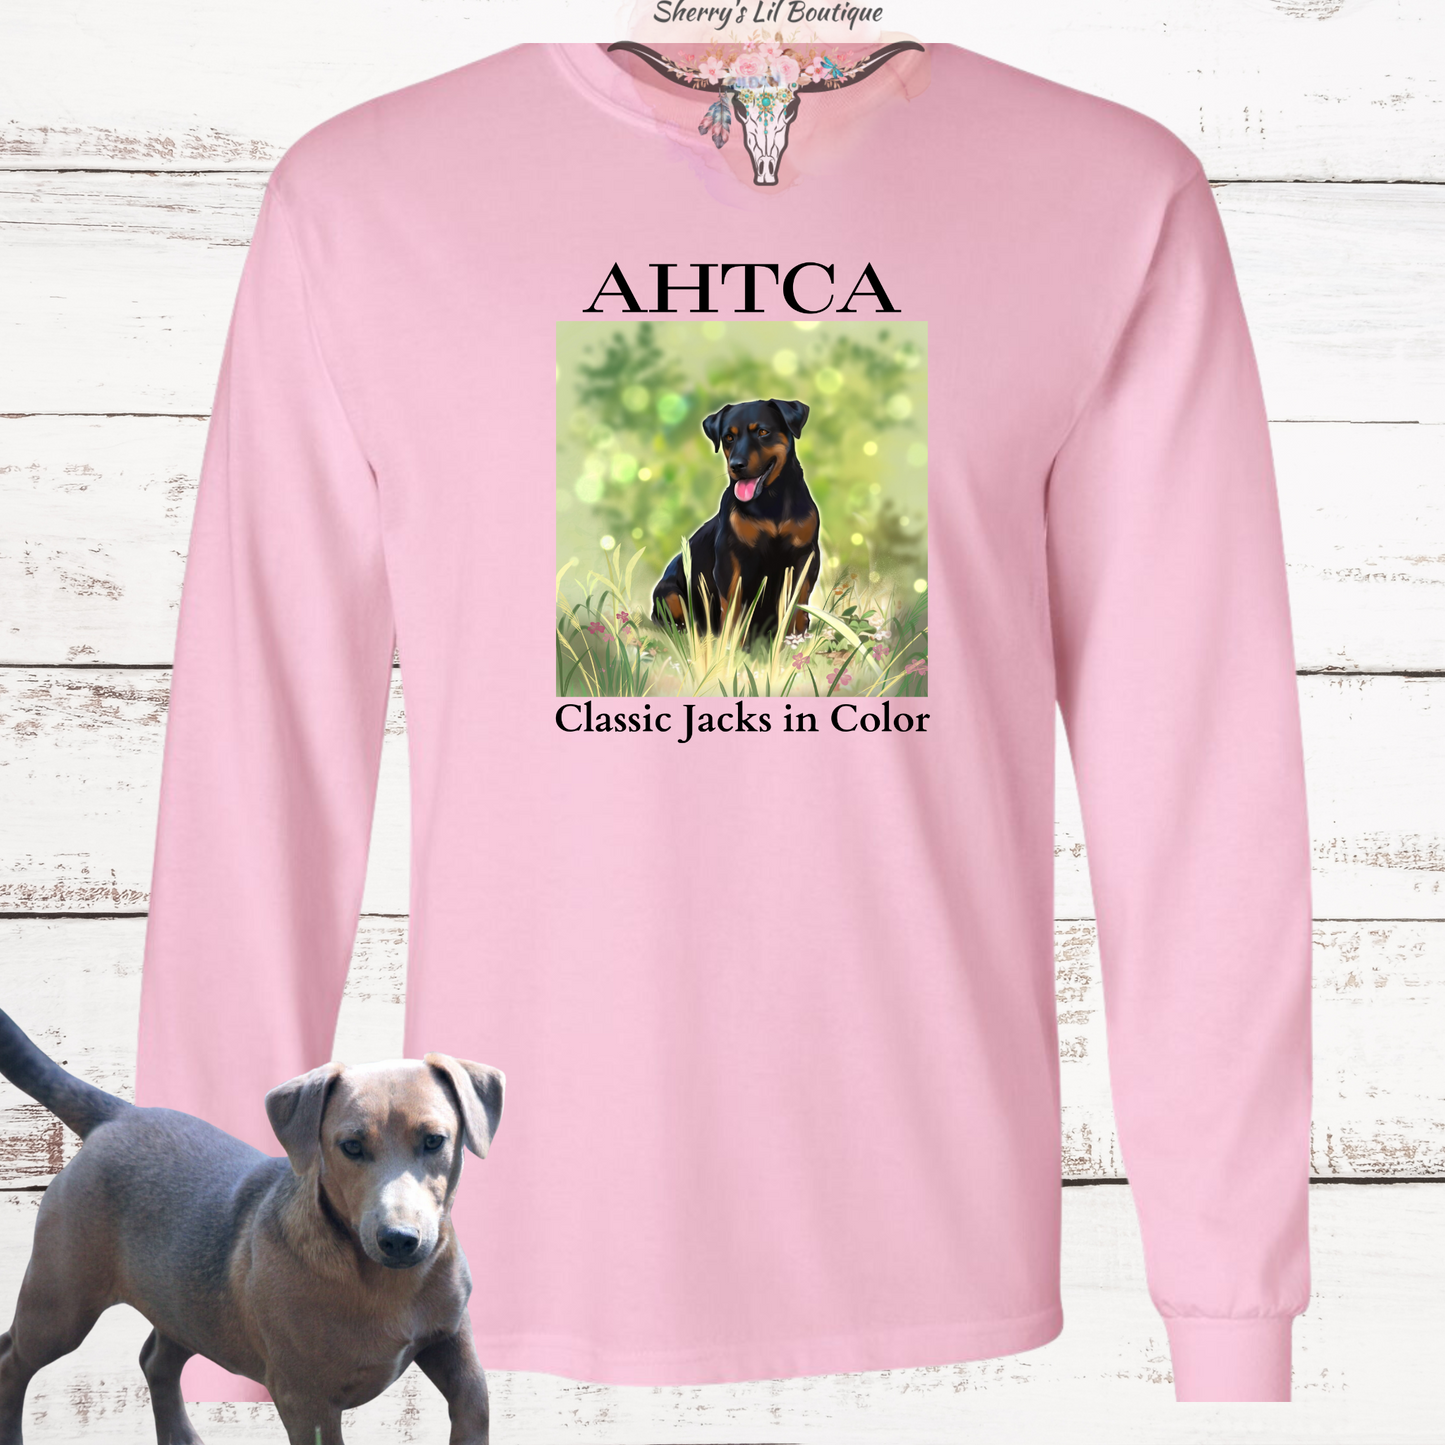 Pink long sleeve tee with AHTCA graphic design